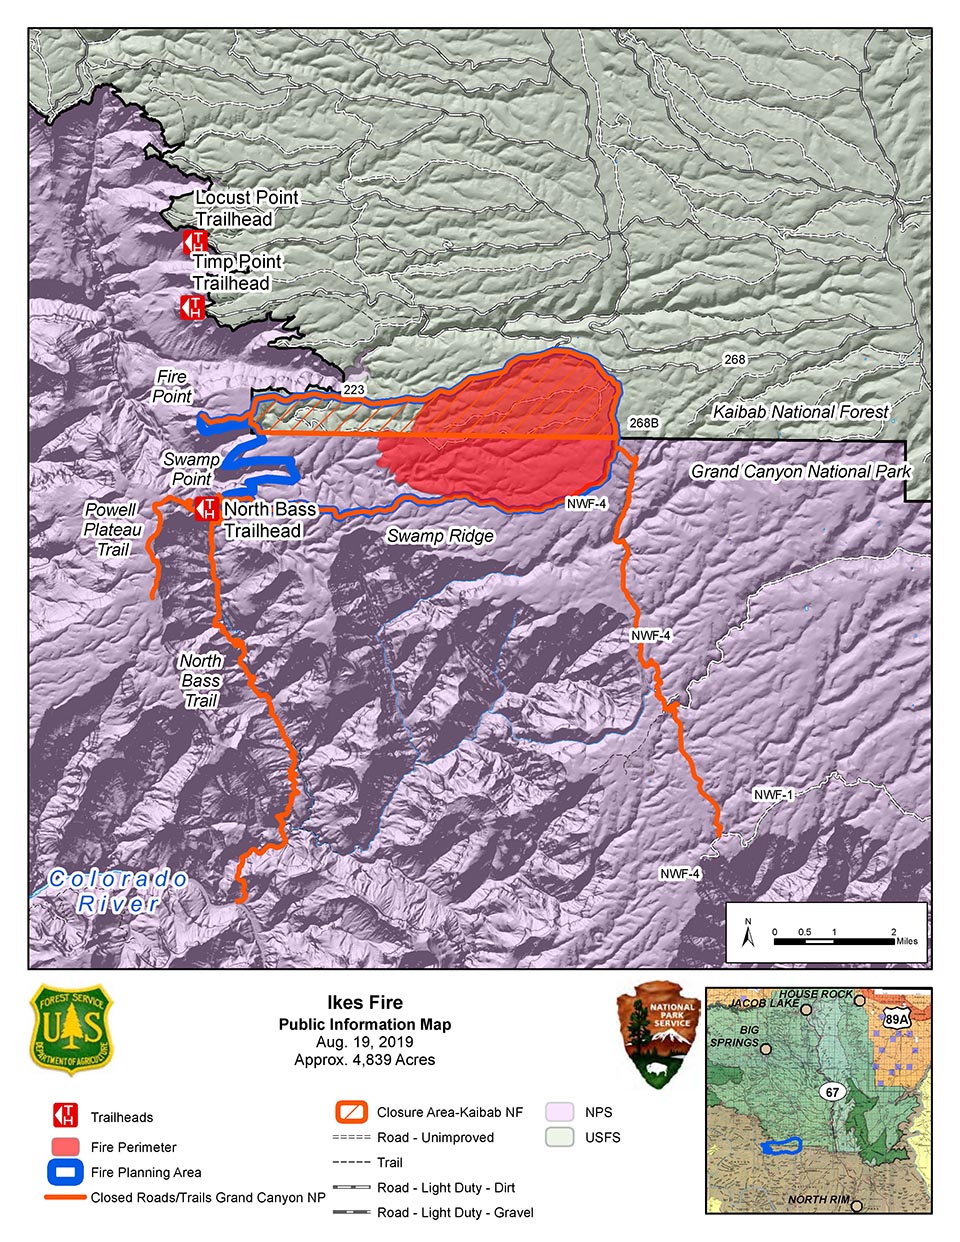 Map showing the Ikes Fire road and trail closures and containment area in relation to the north side of Grand Canyon National Park in its boundary with Kaibab Nat. Forest